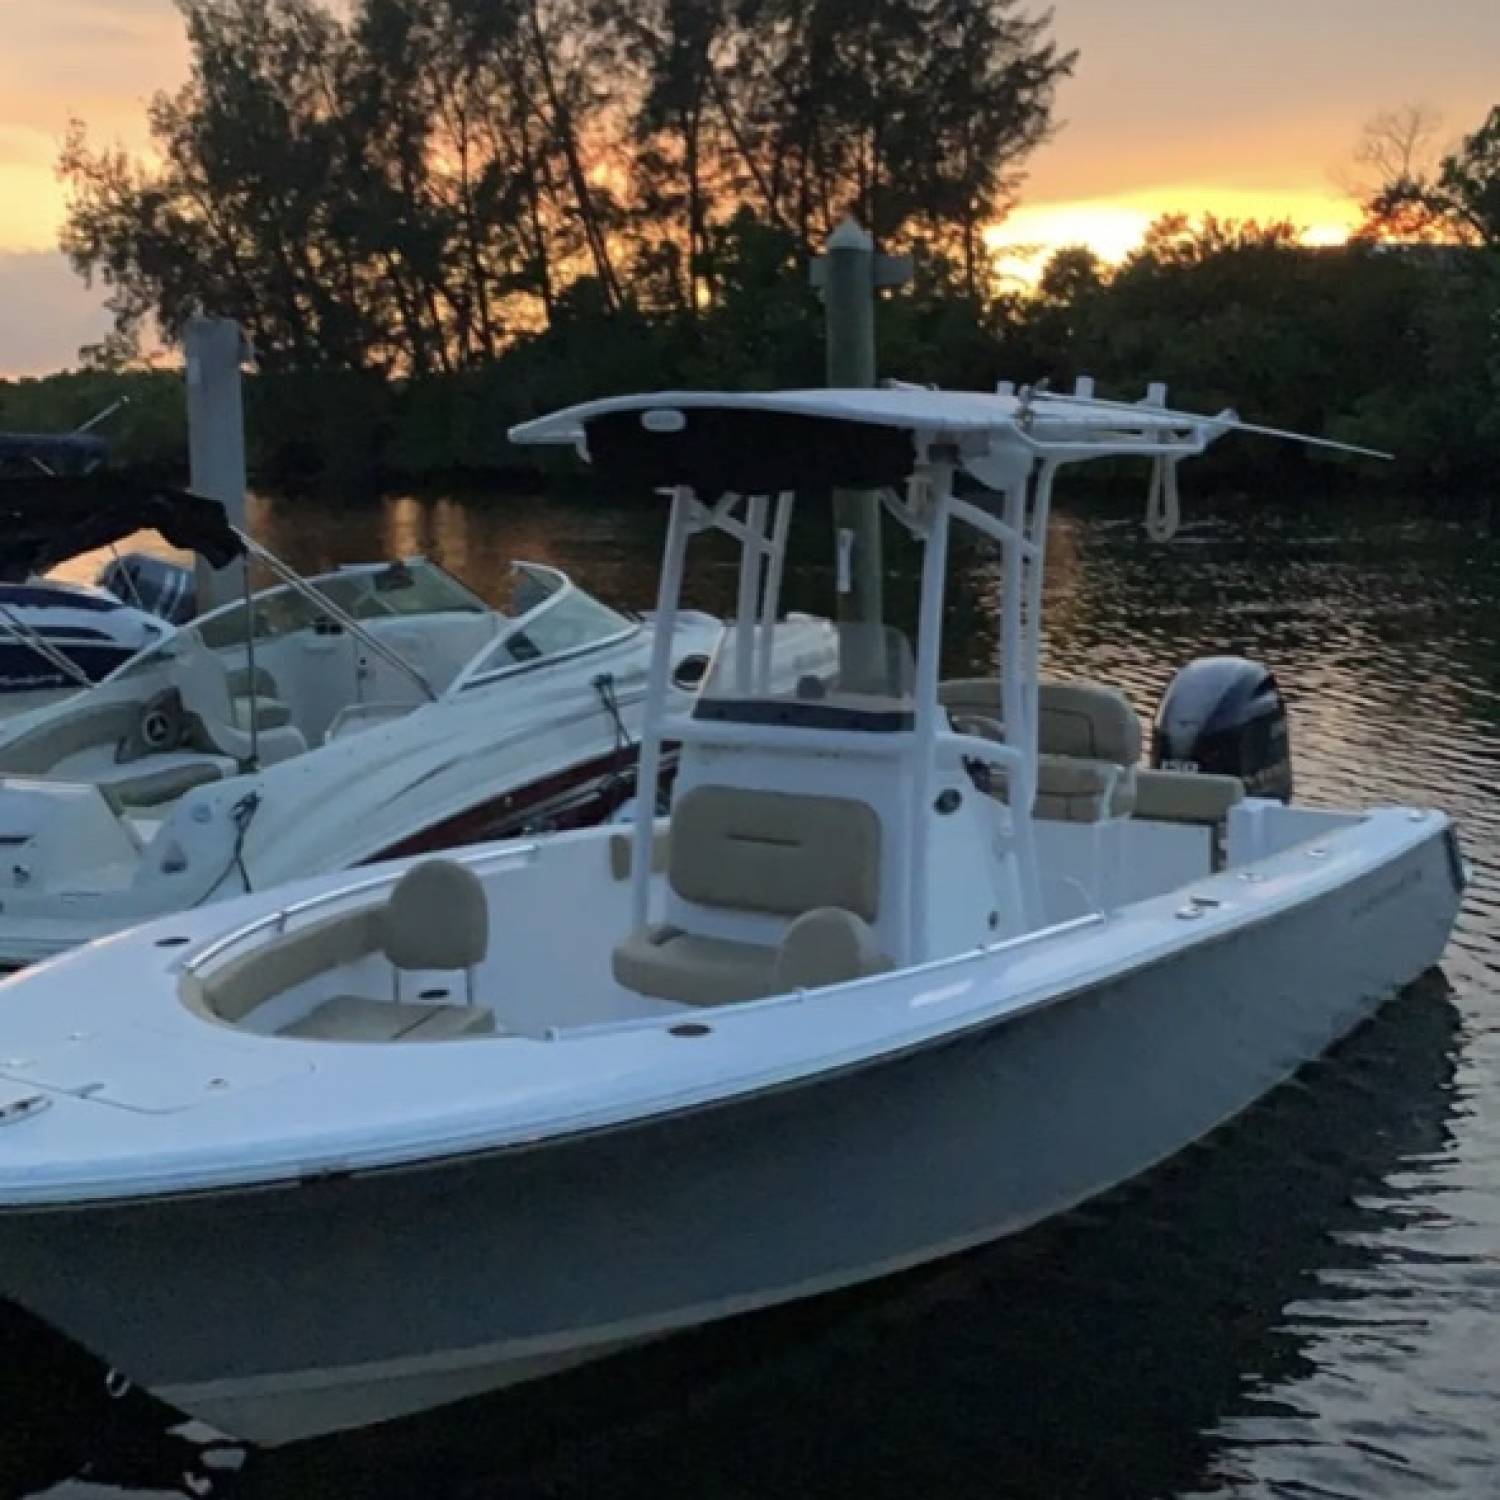 My wife and I took our new 2018 Sportsman 212 for our first sunset cruise and took this photo b...